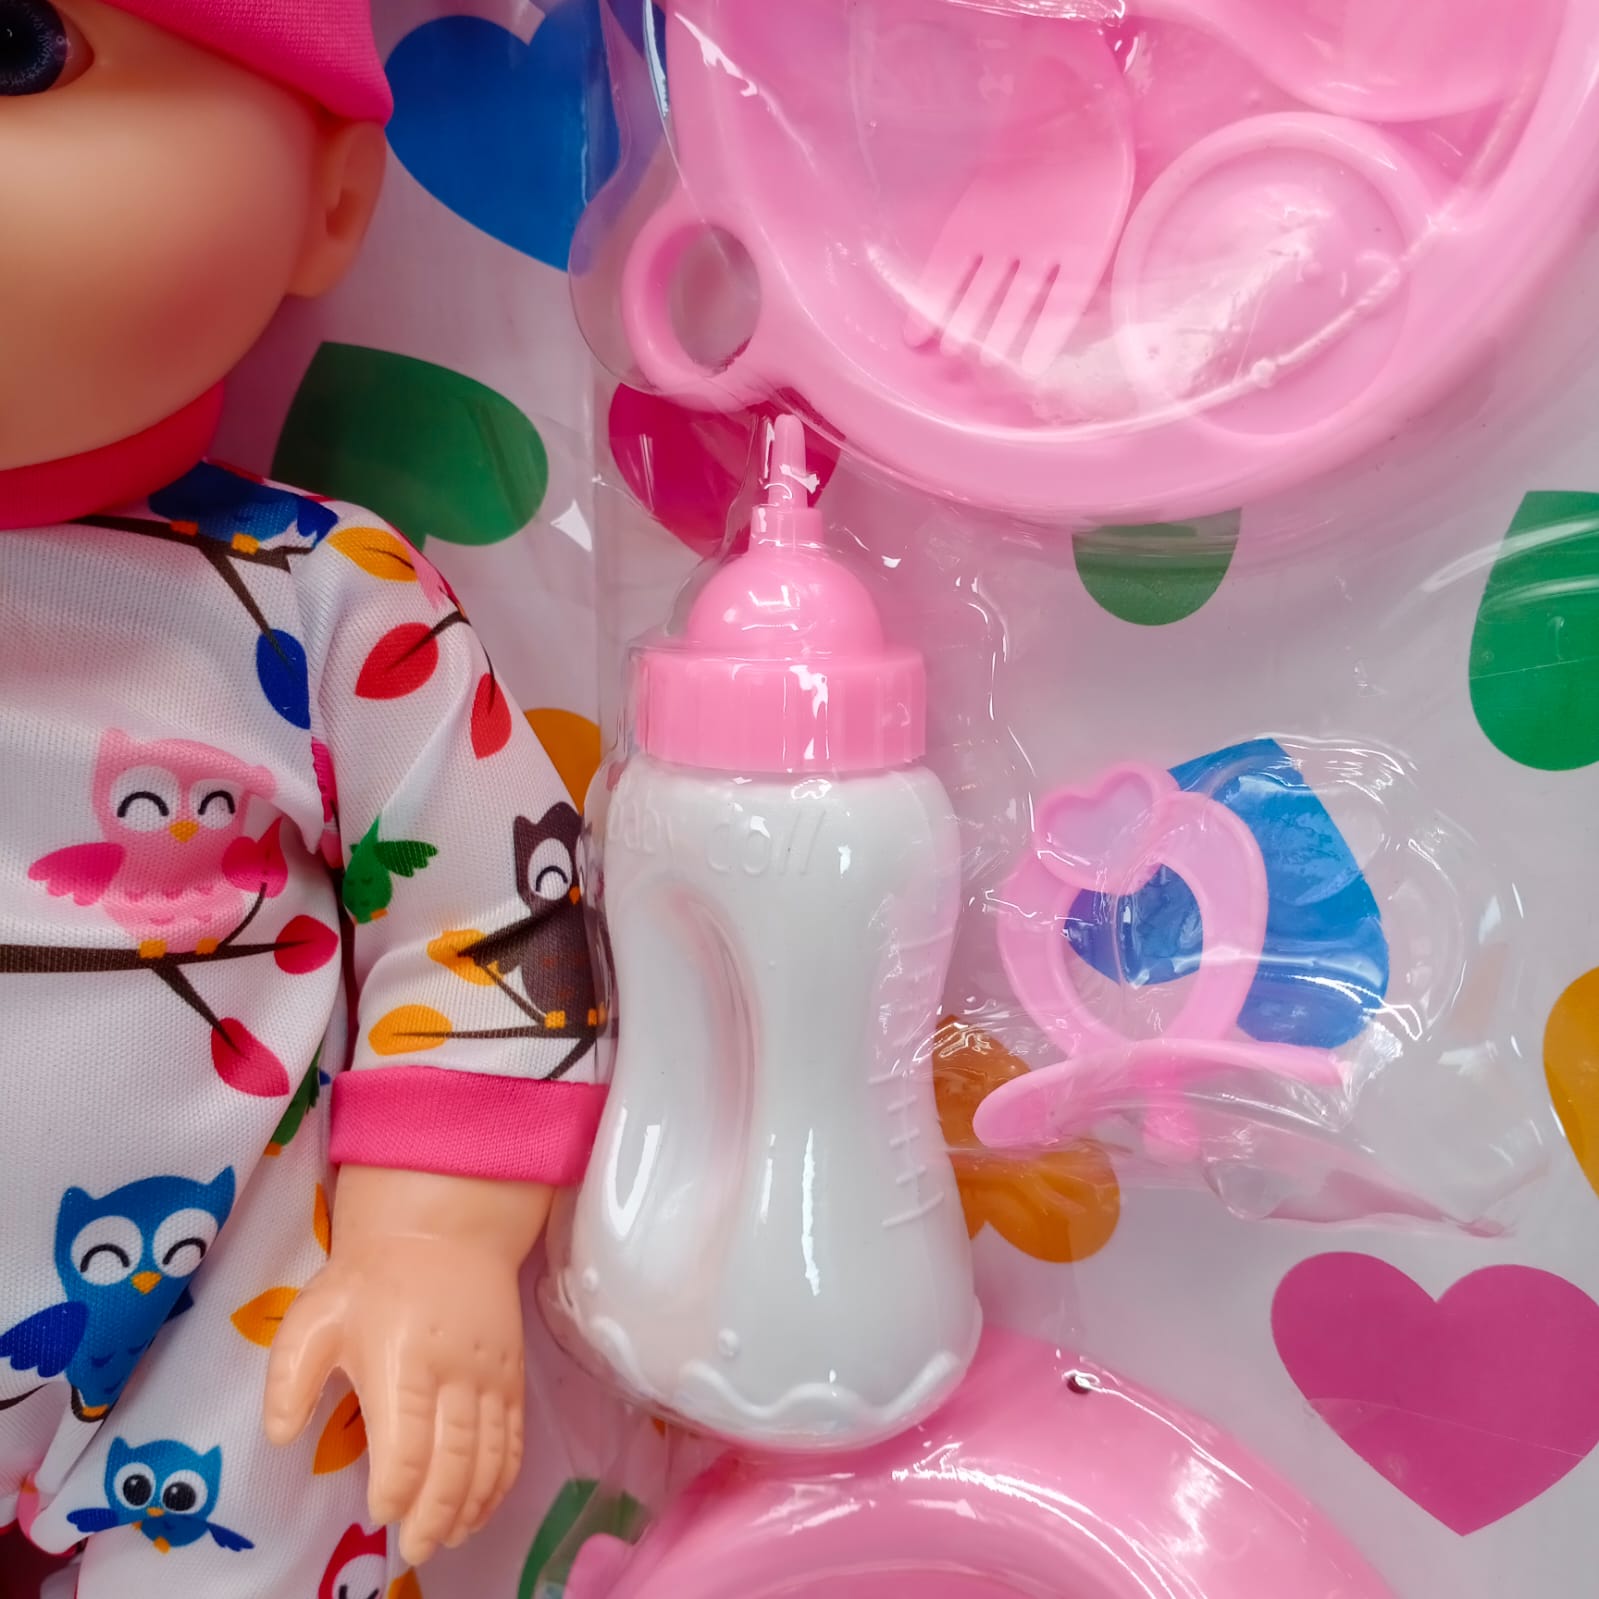 Lovely Baby Doll With Her Feeder and Other Accessories Lovely Baby Doll With Her Feeder and Other Accessories Lovely Baby Doll With Her Feeder and Other Accessories Lovely Baby Doll With Her Feeder And Other Accessories